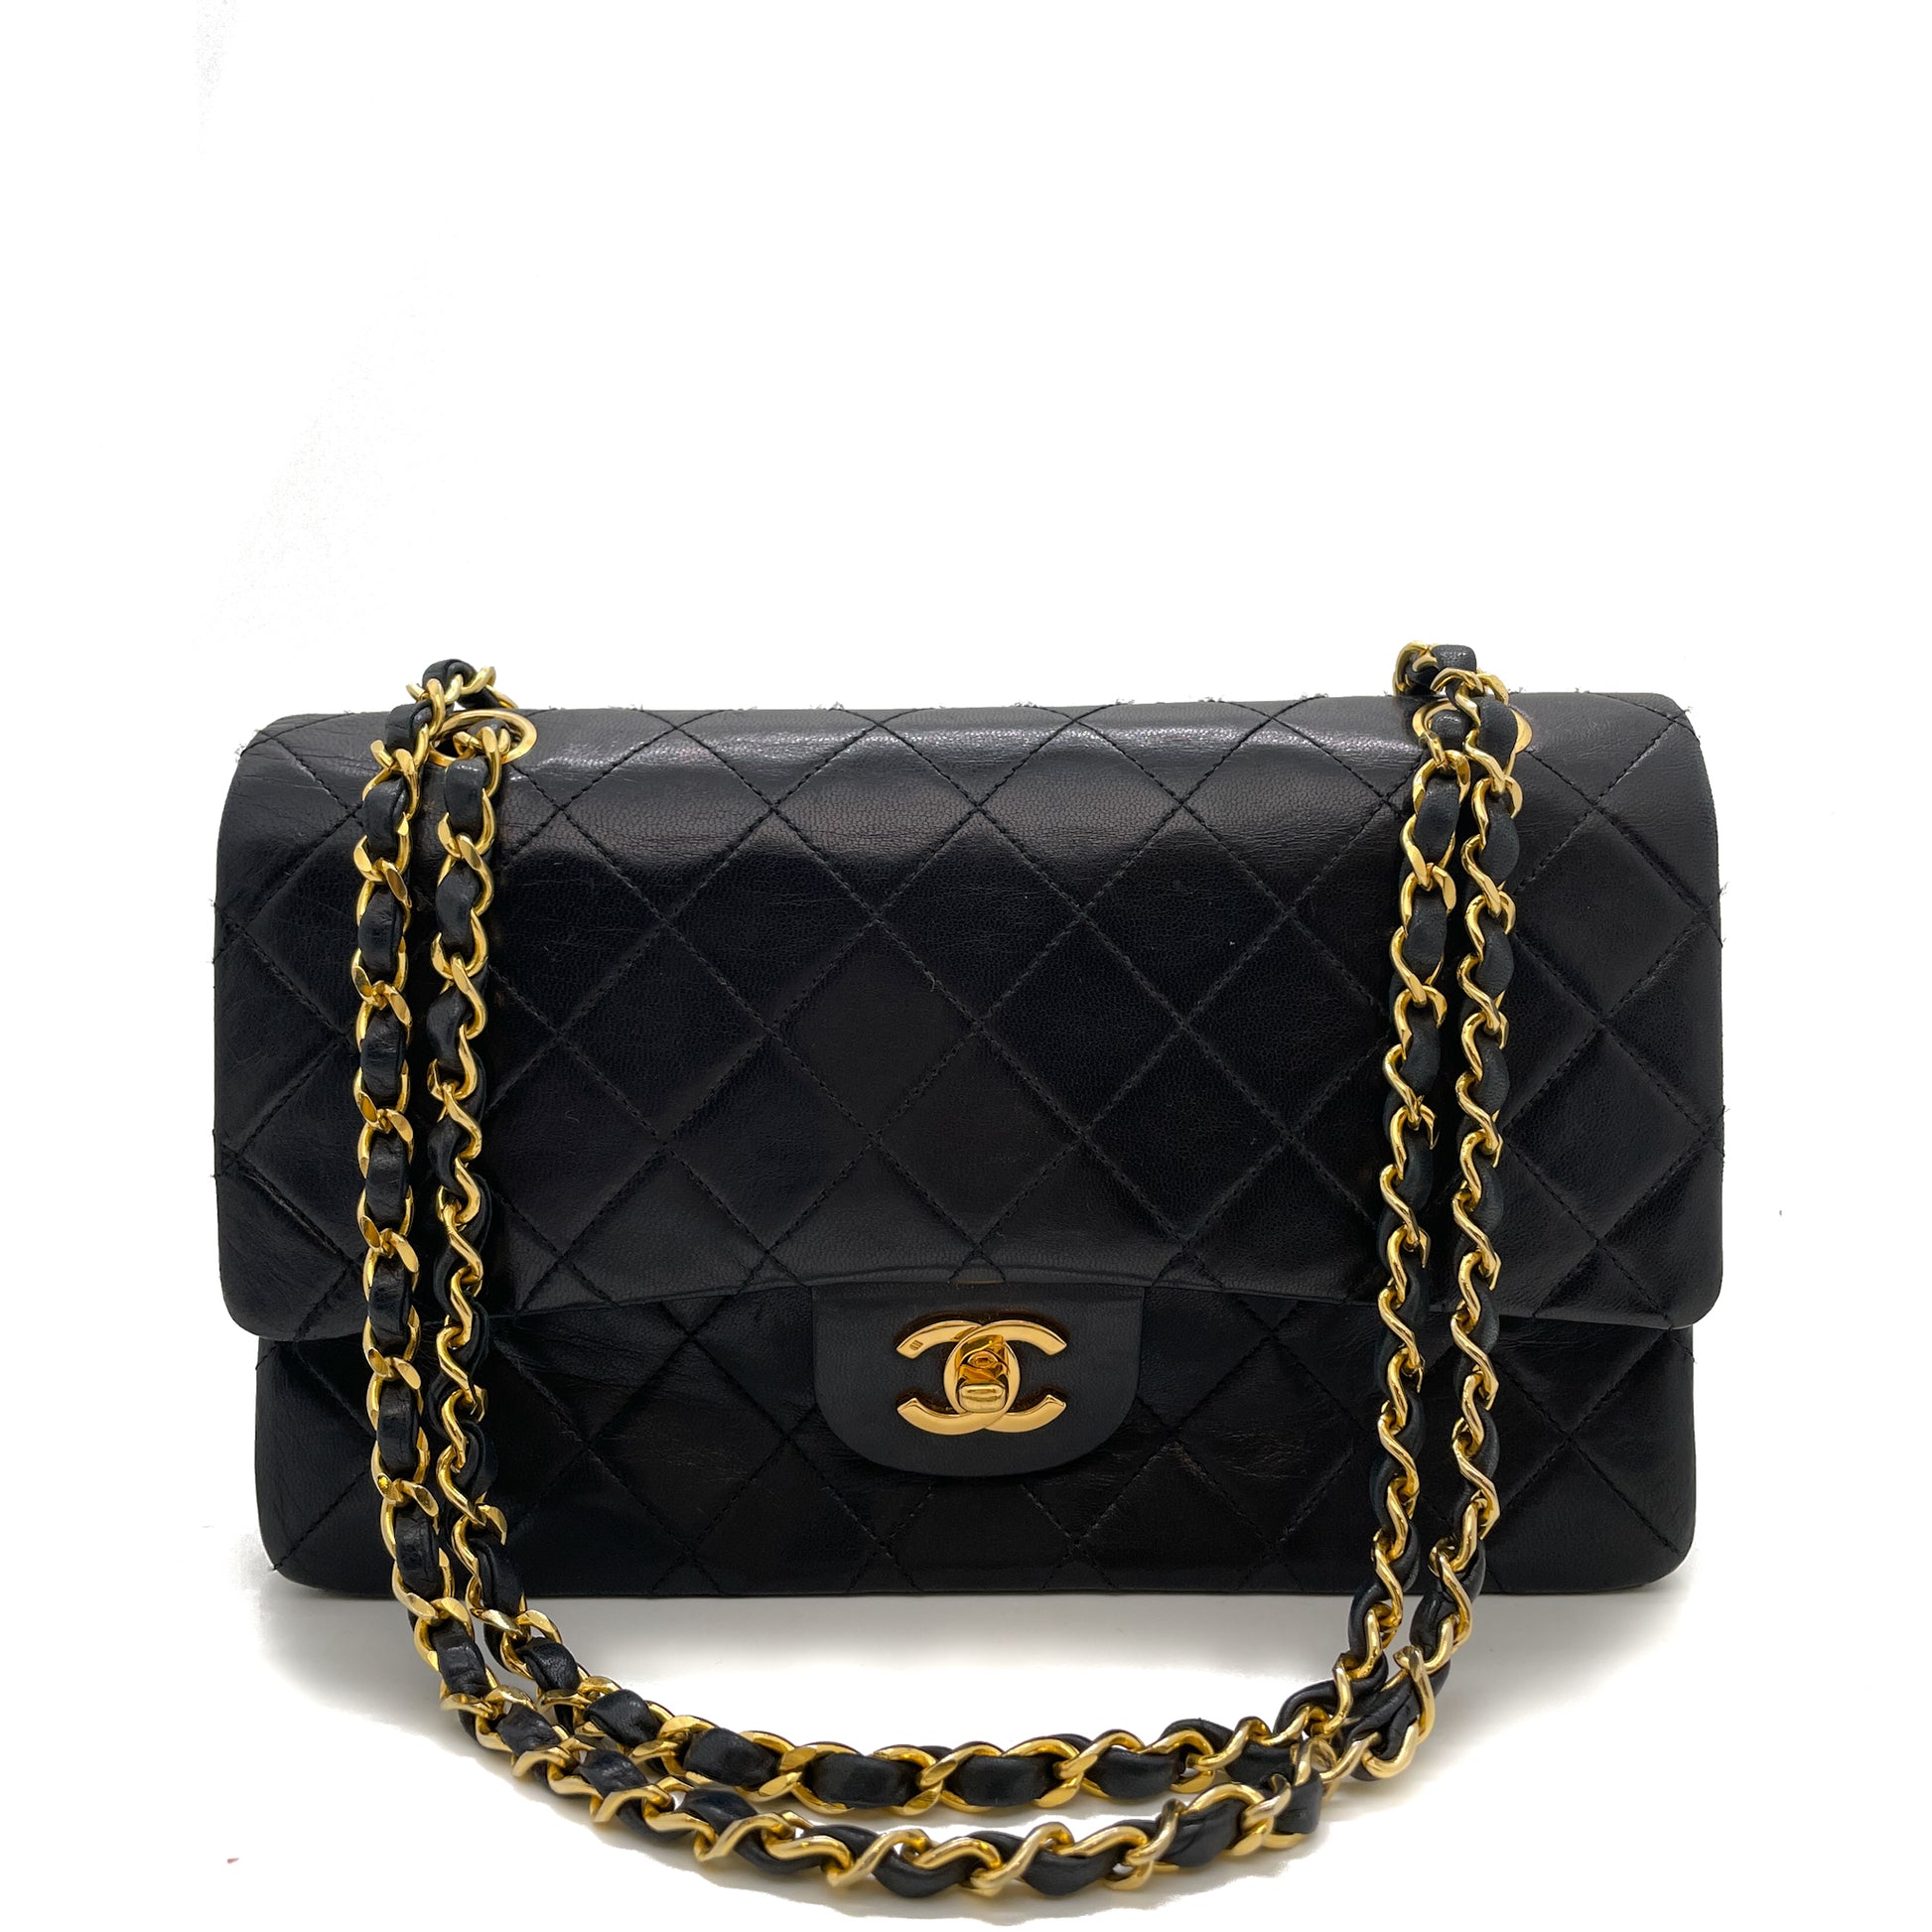 Black Vintage Round Flap Bag in Quilted Leather with Gold Hardware